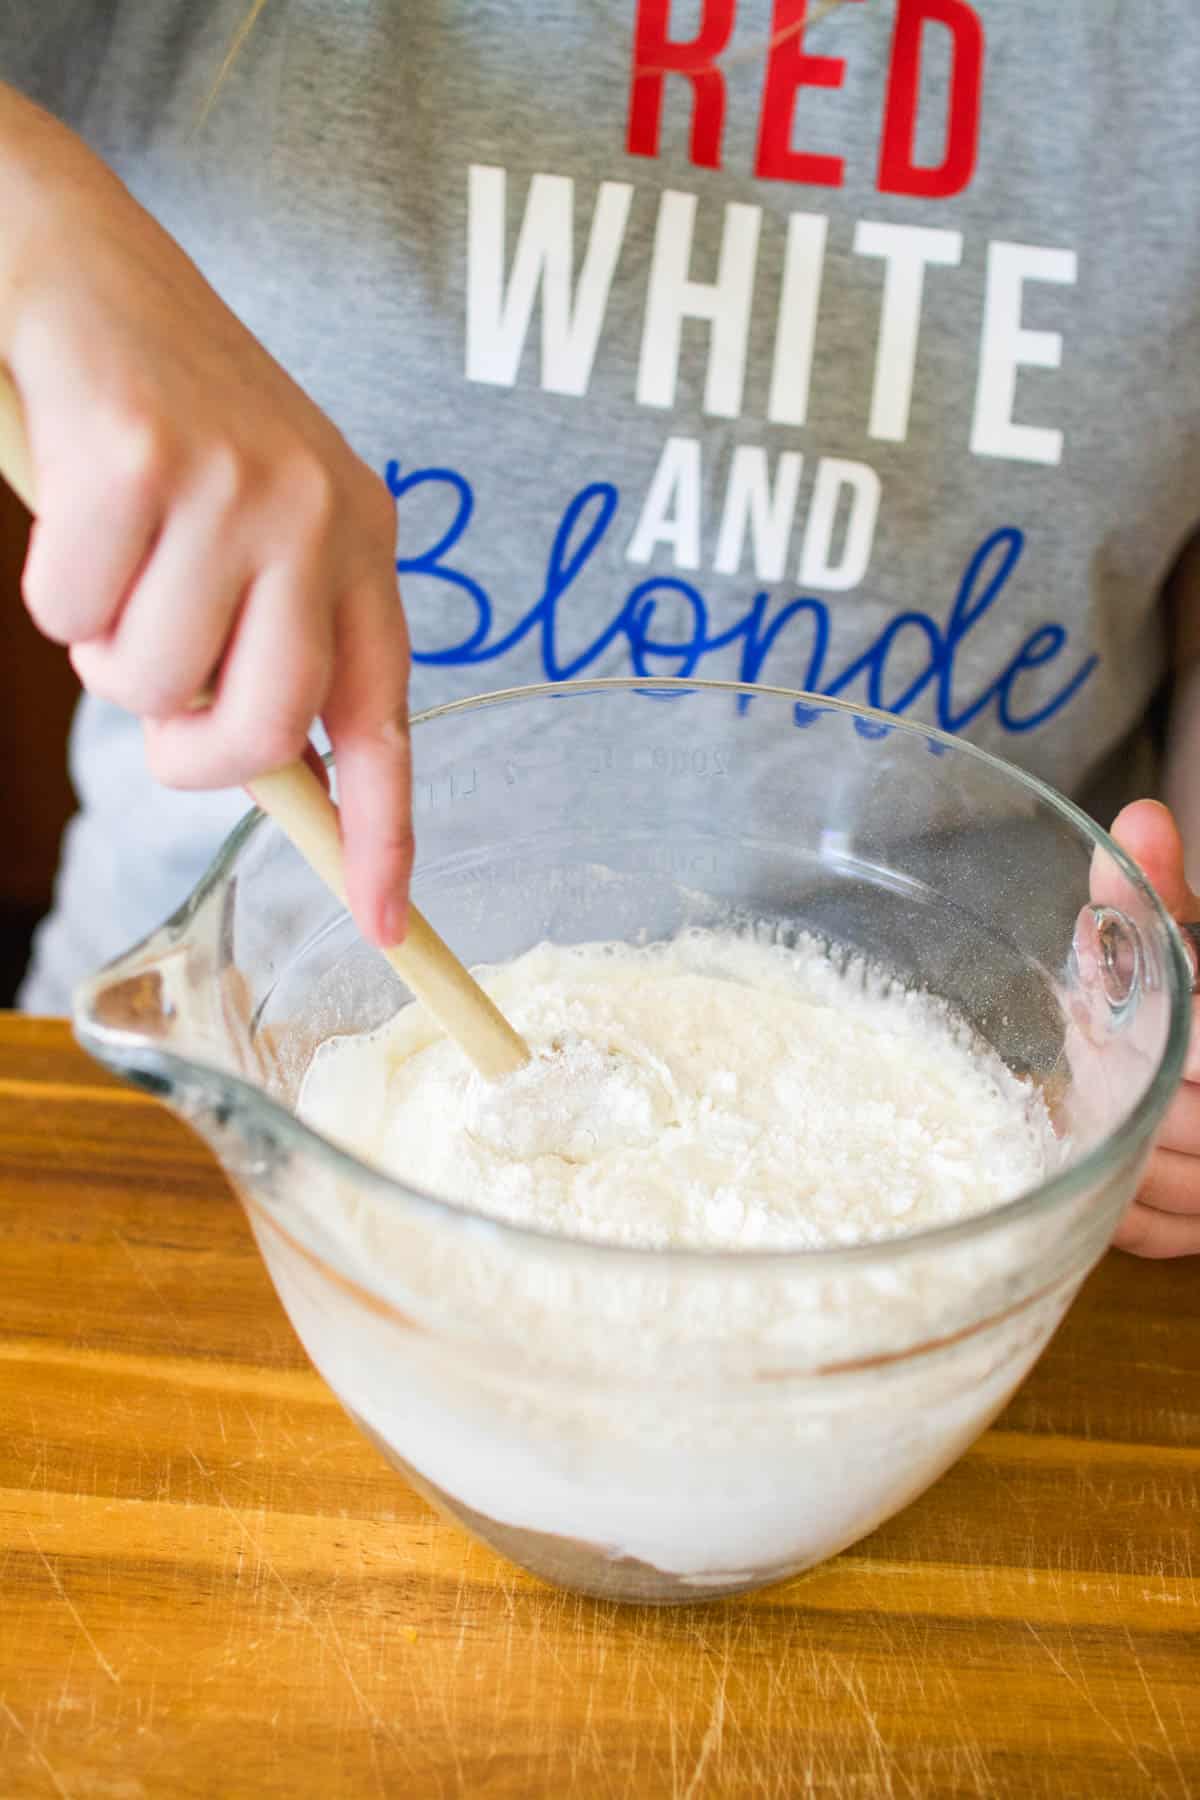 A woman mixing angel food cake mix and water in a mixing bowl.